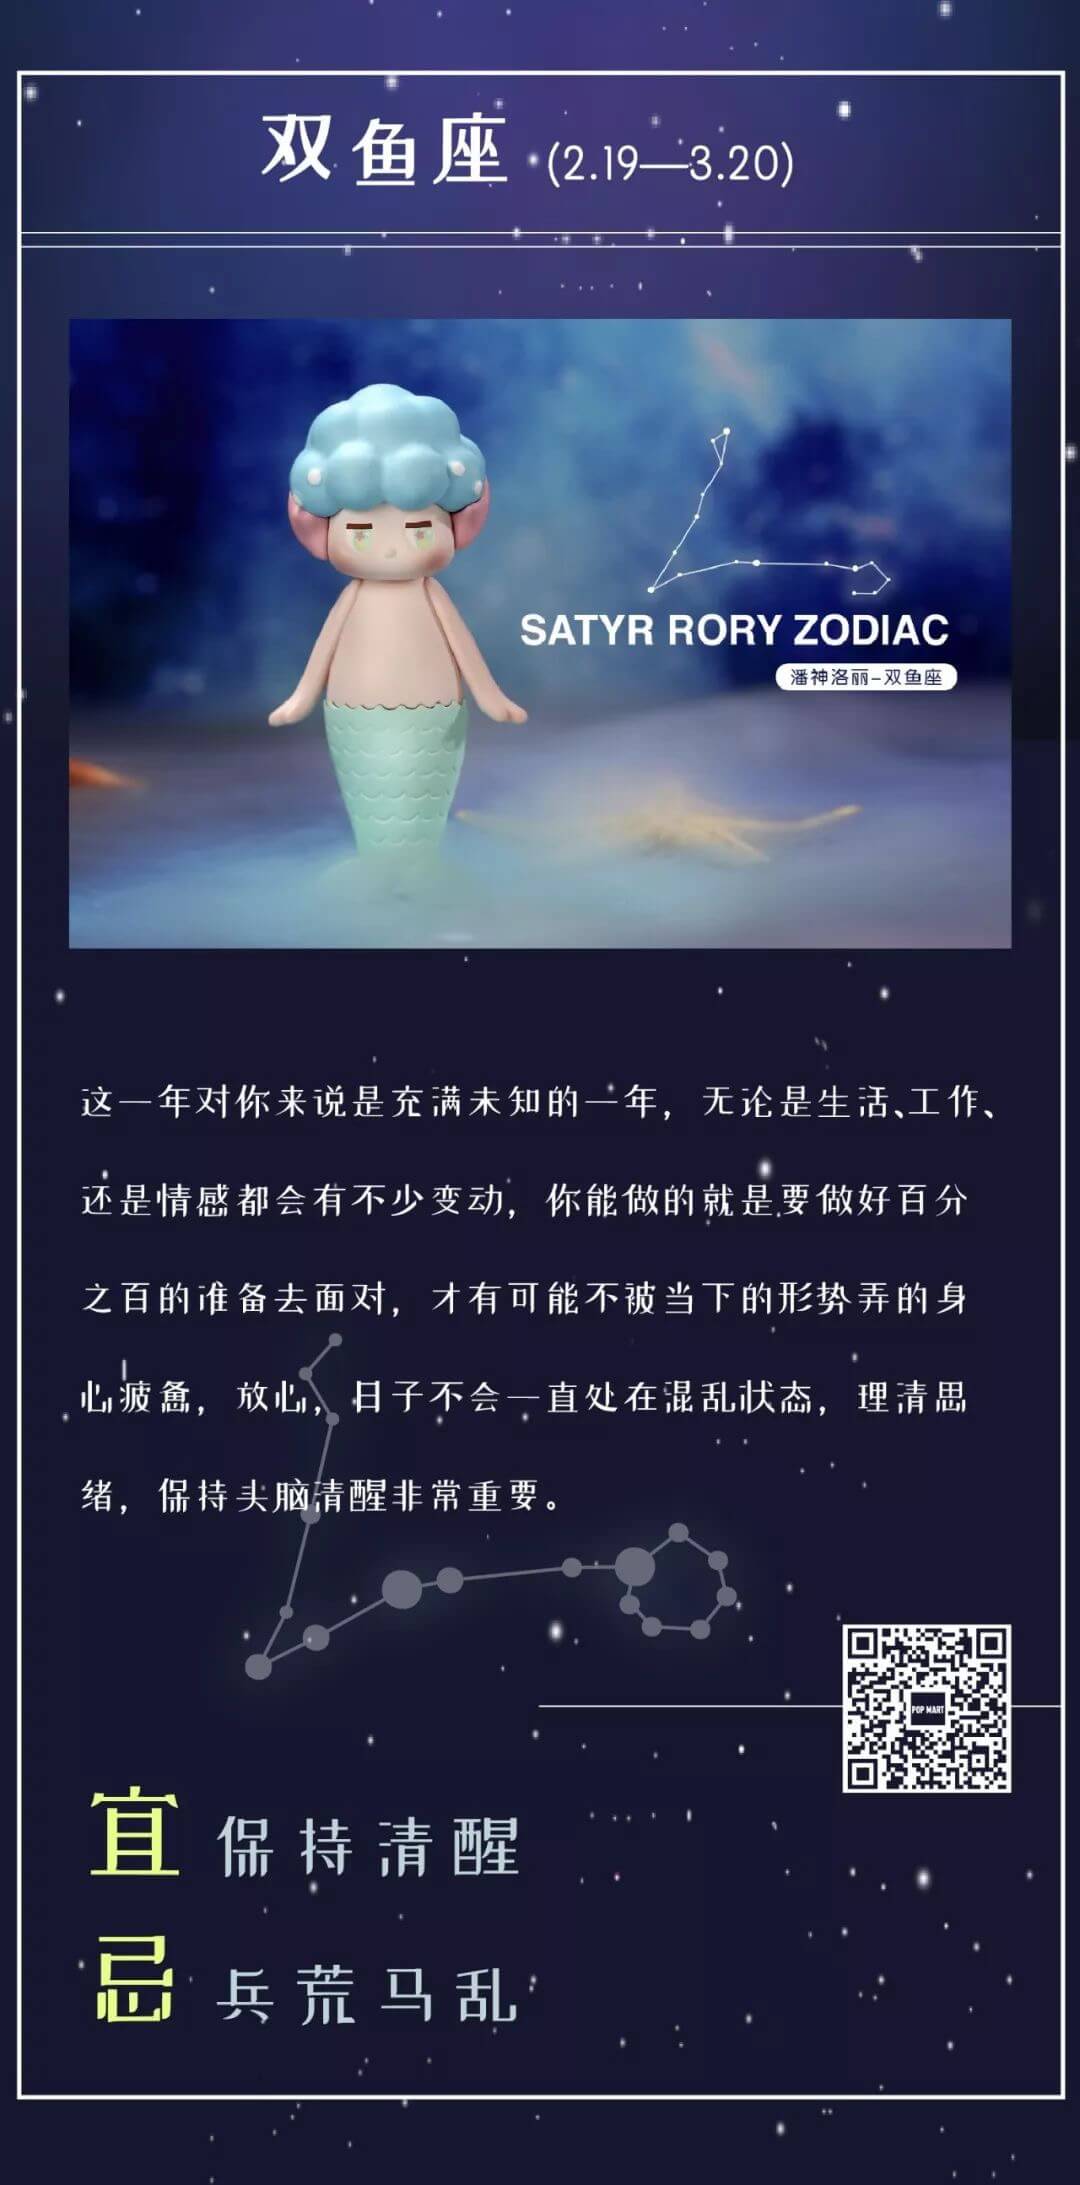 Satyr-Rory-Zodic-Edition-Mini-Series-by-Seulgie-Lee-x-POP-MART-r